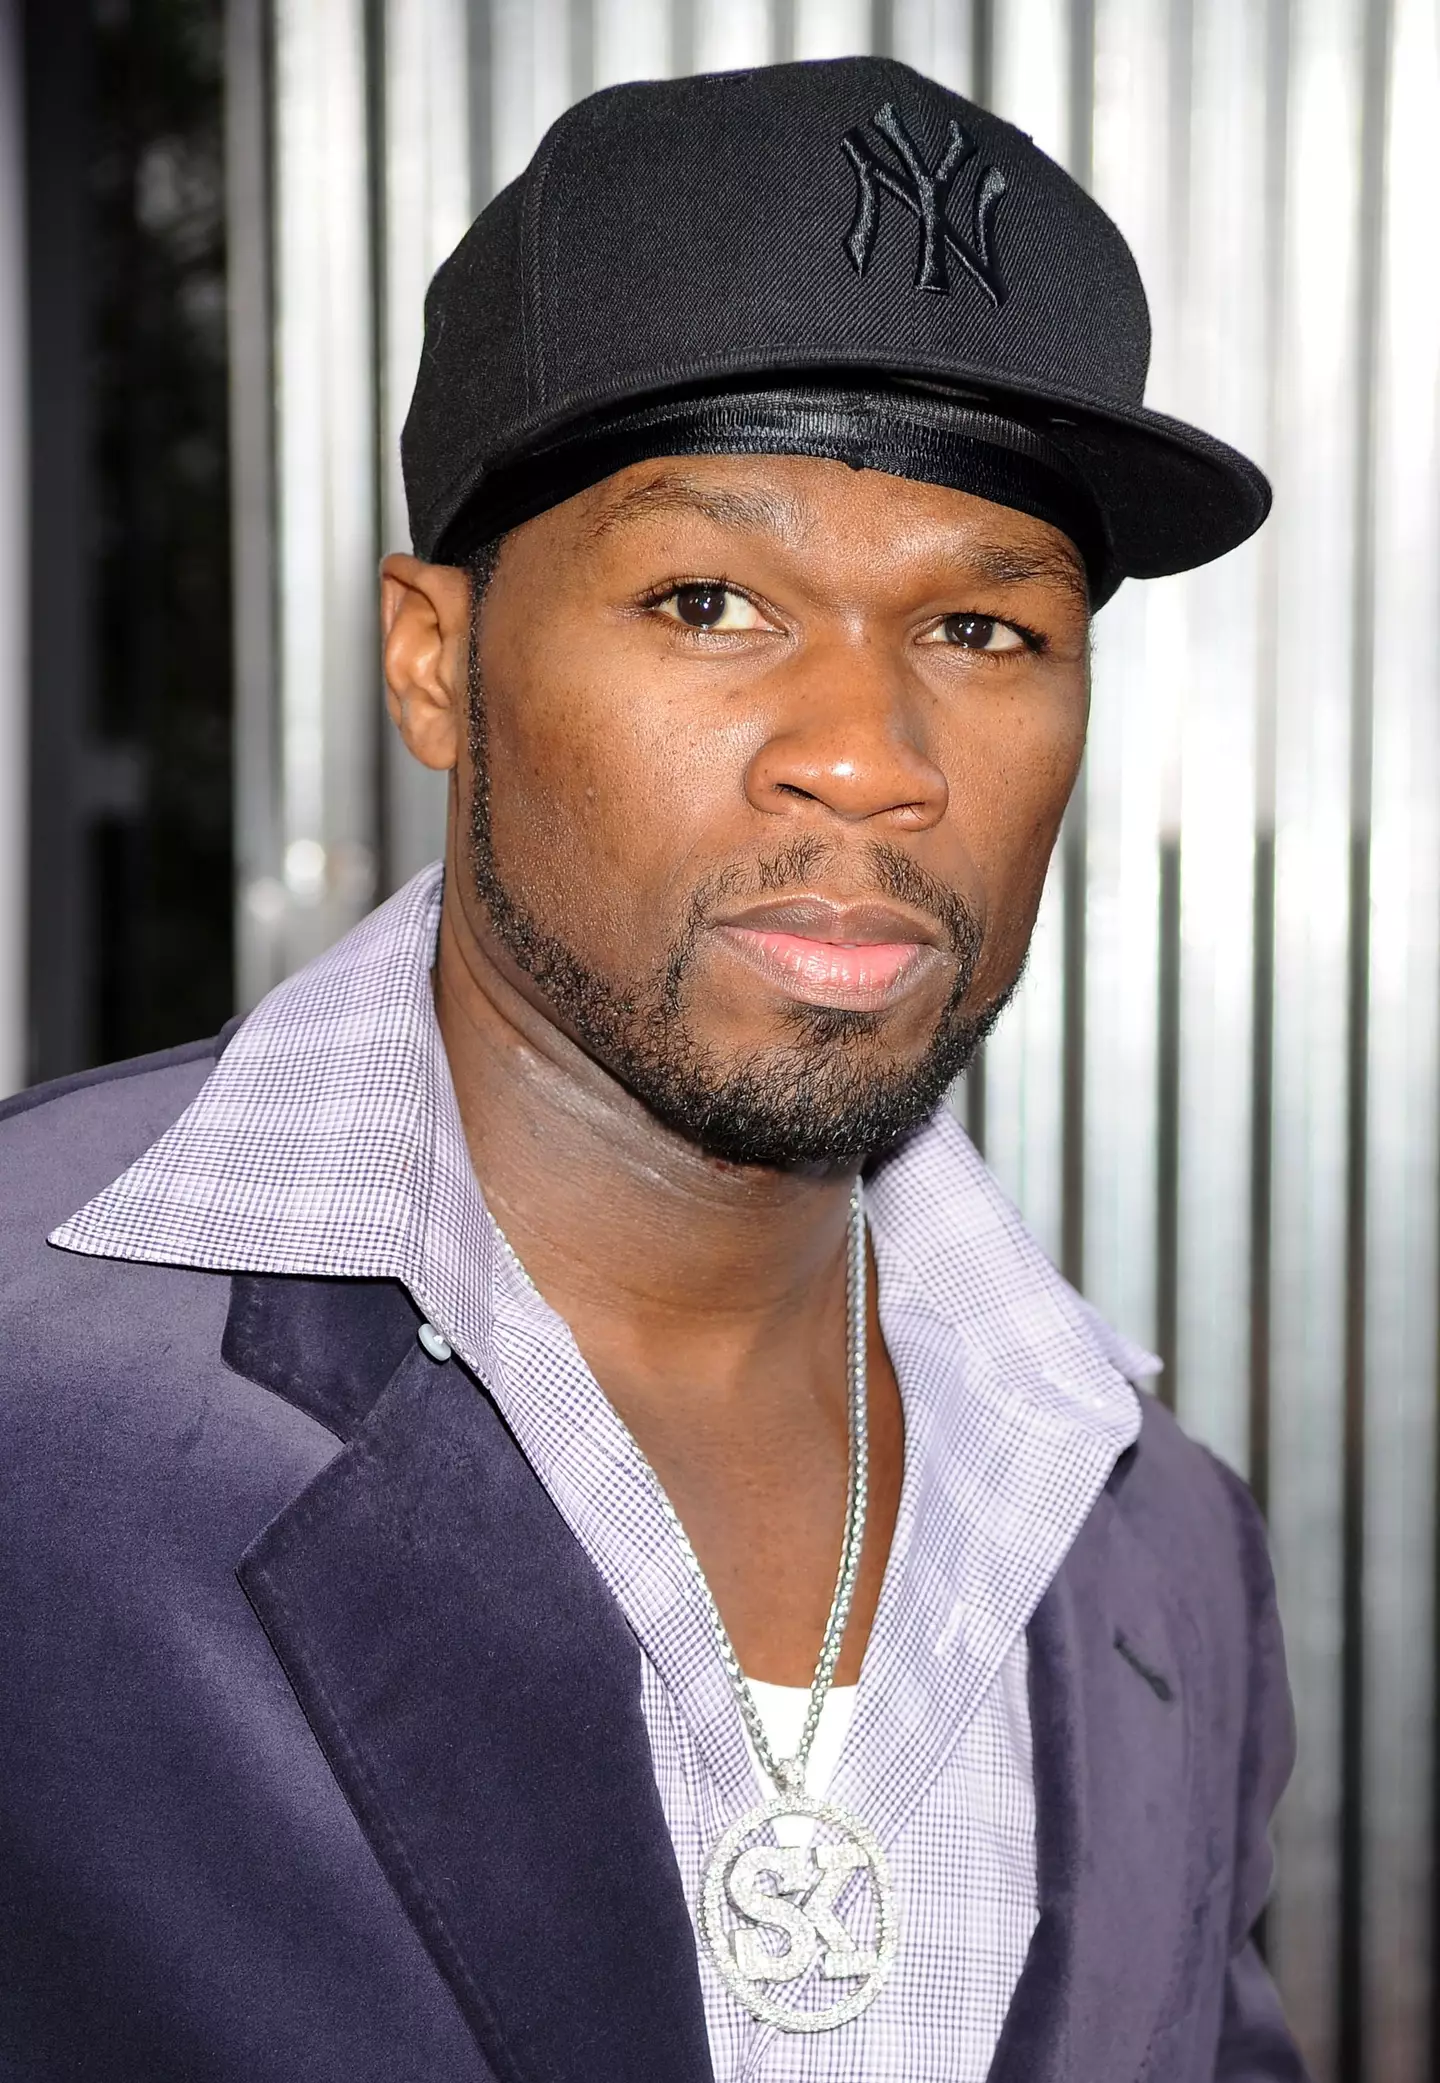 50 Cent claimed he wouldn't make anymore solo albums if Kanye West passed him in sales.